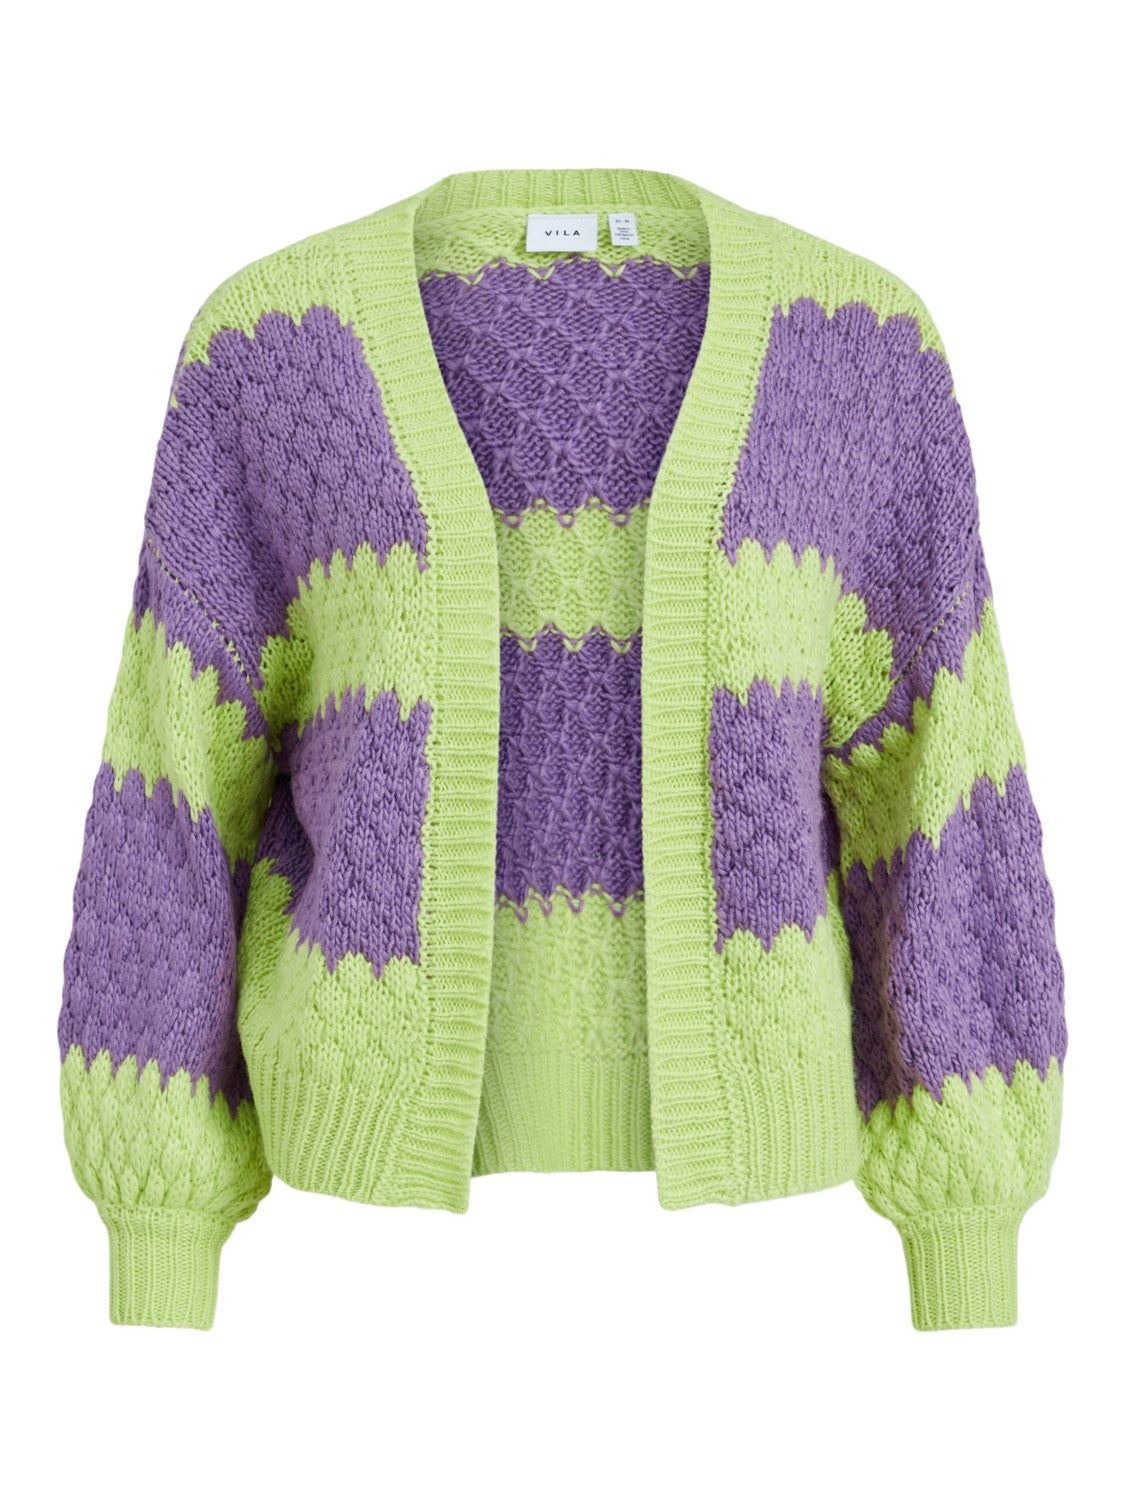 Axia Cardigan (Amehyst & Lime)